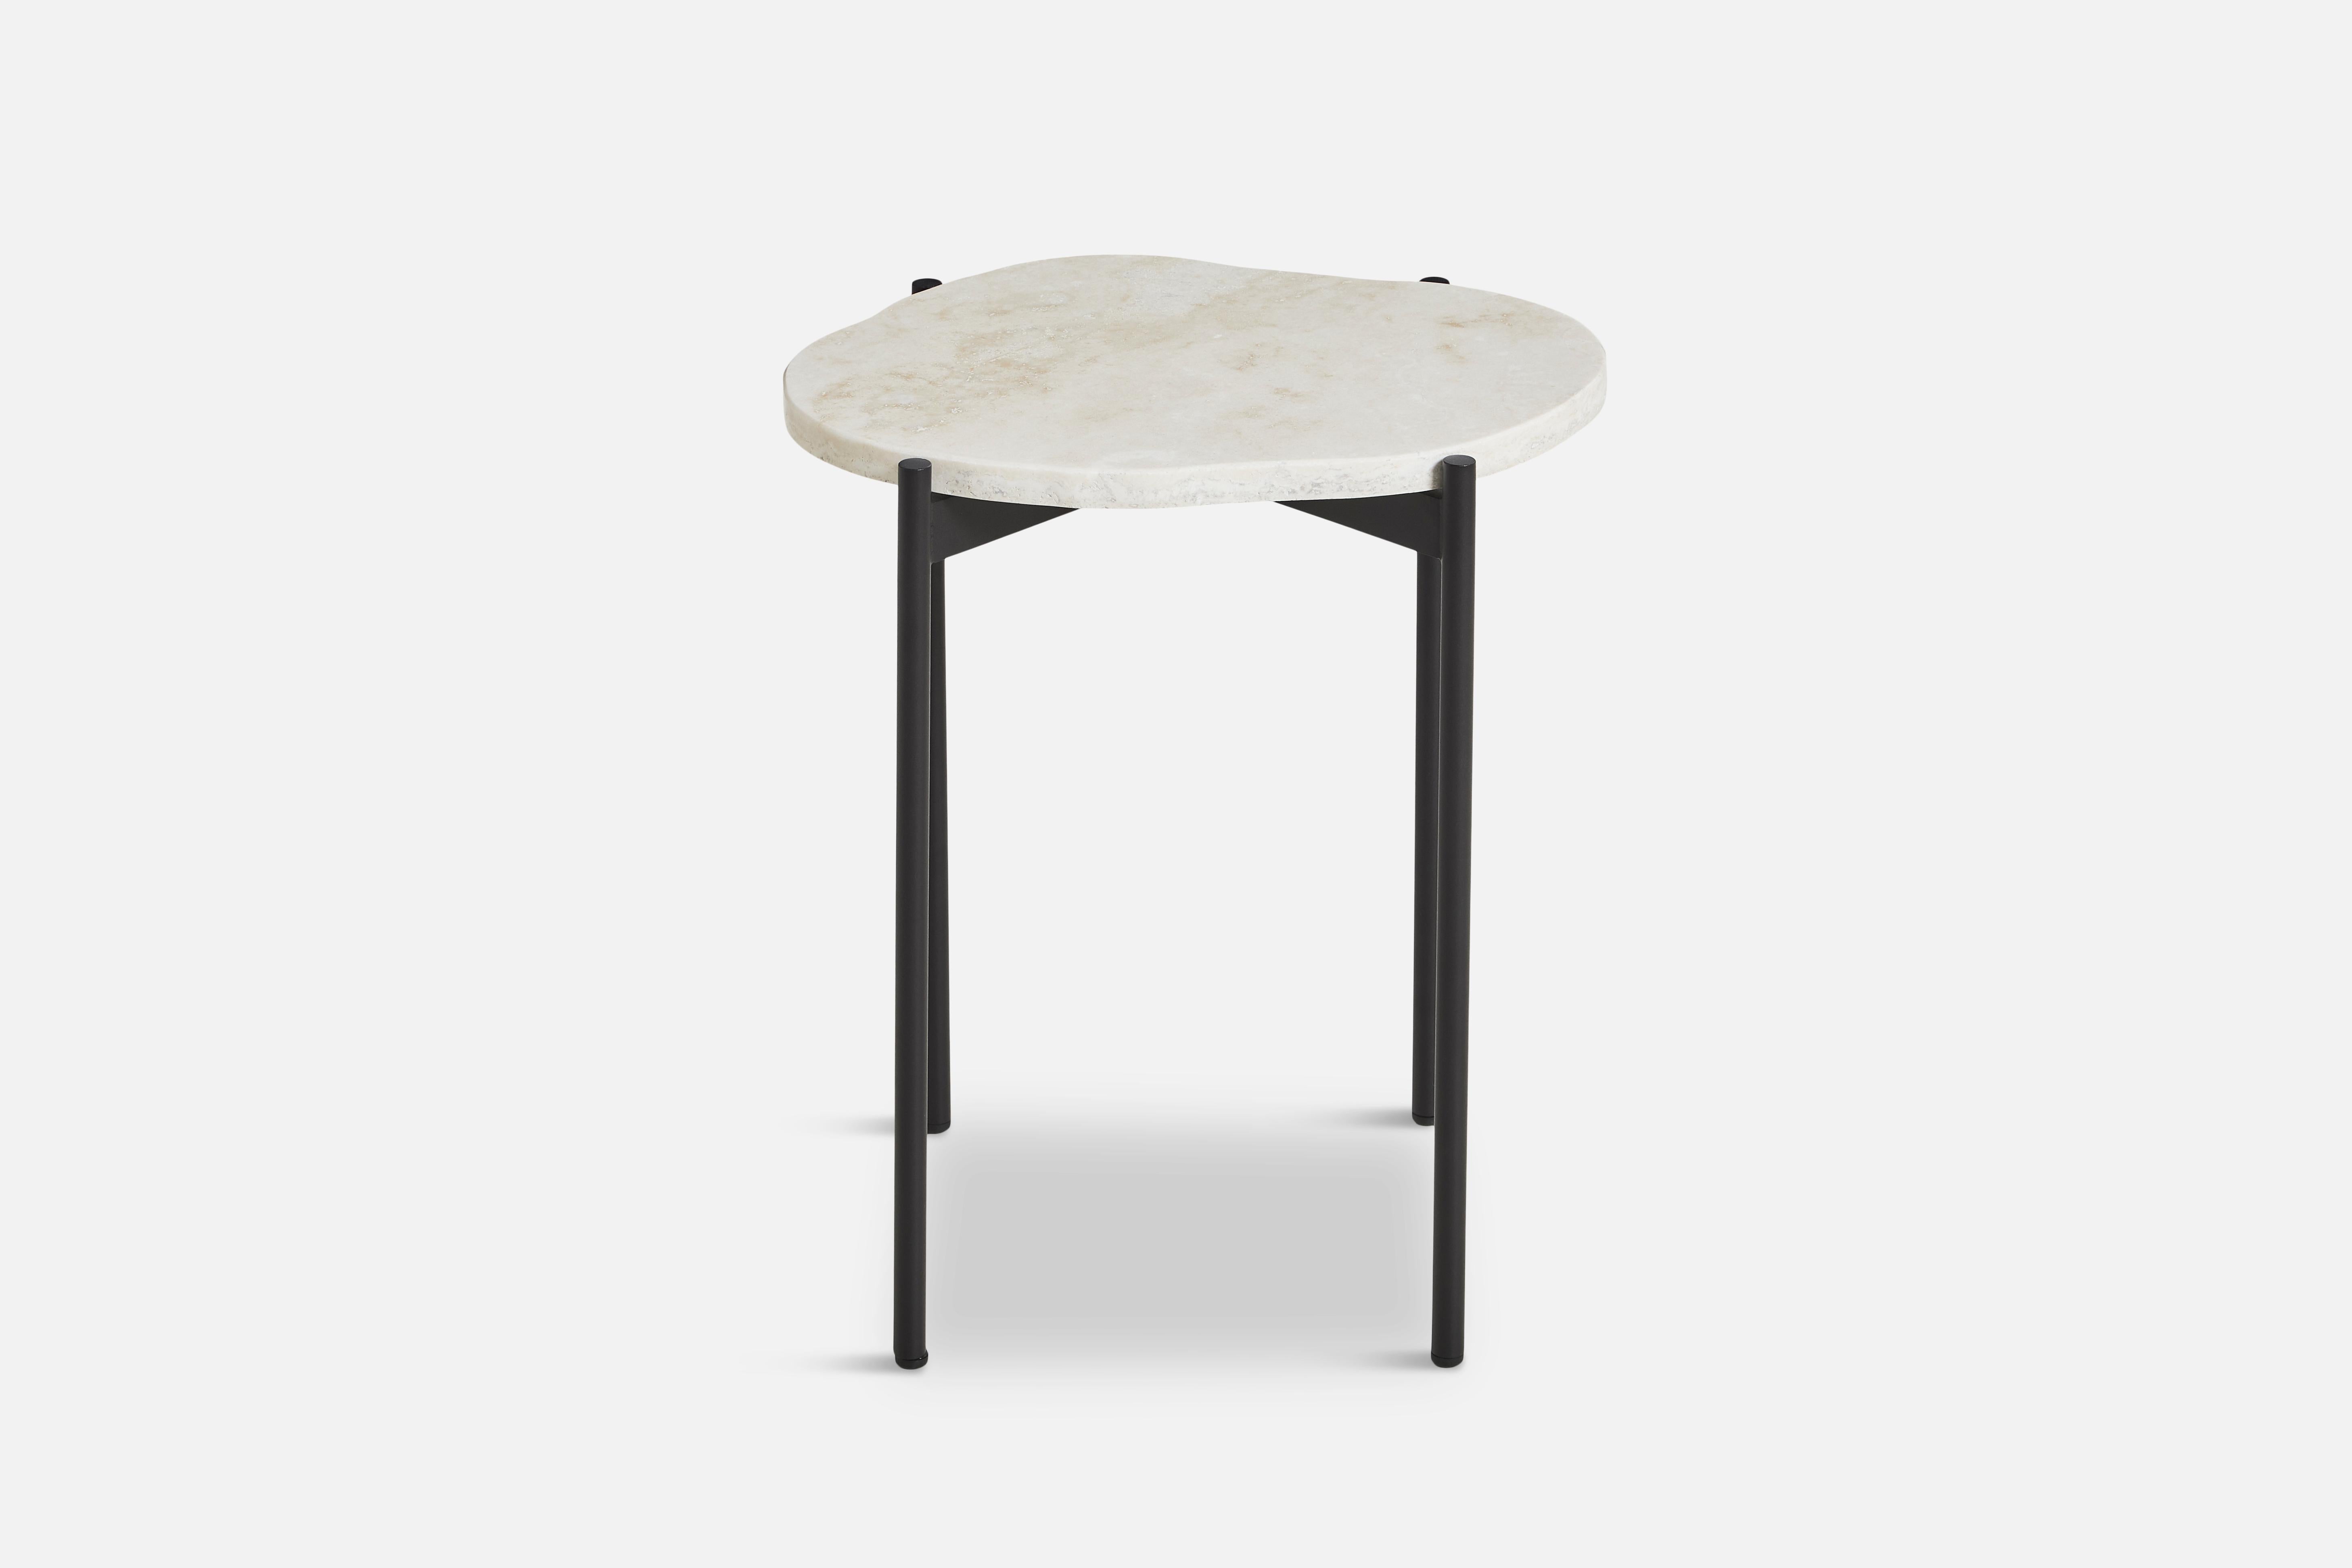 La Terra small occasional table by Agnes Morguet
Materials: metal, Ivory Travertine.
Dimensions: D 31.2 x W 40.5 x H 45.7 cm

The founders, Mia and Torben Koed, decided to put their 30 years of experience into a new project. It was time for a